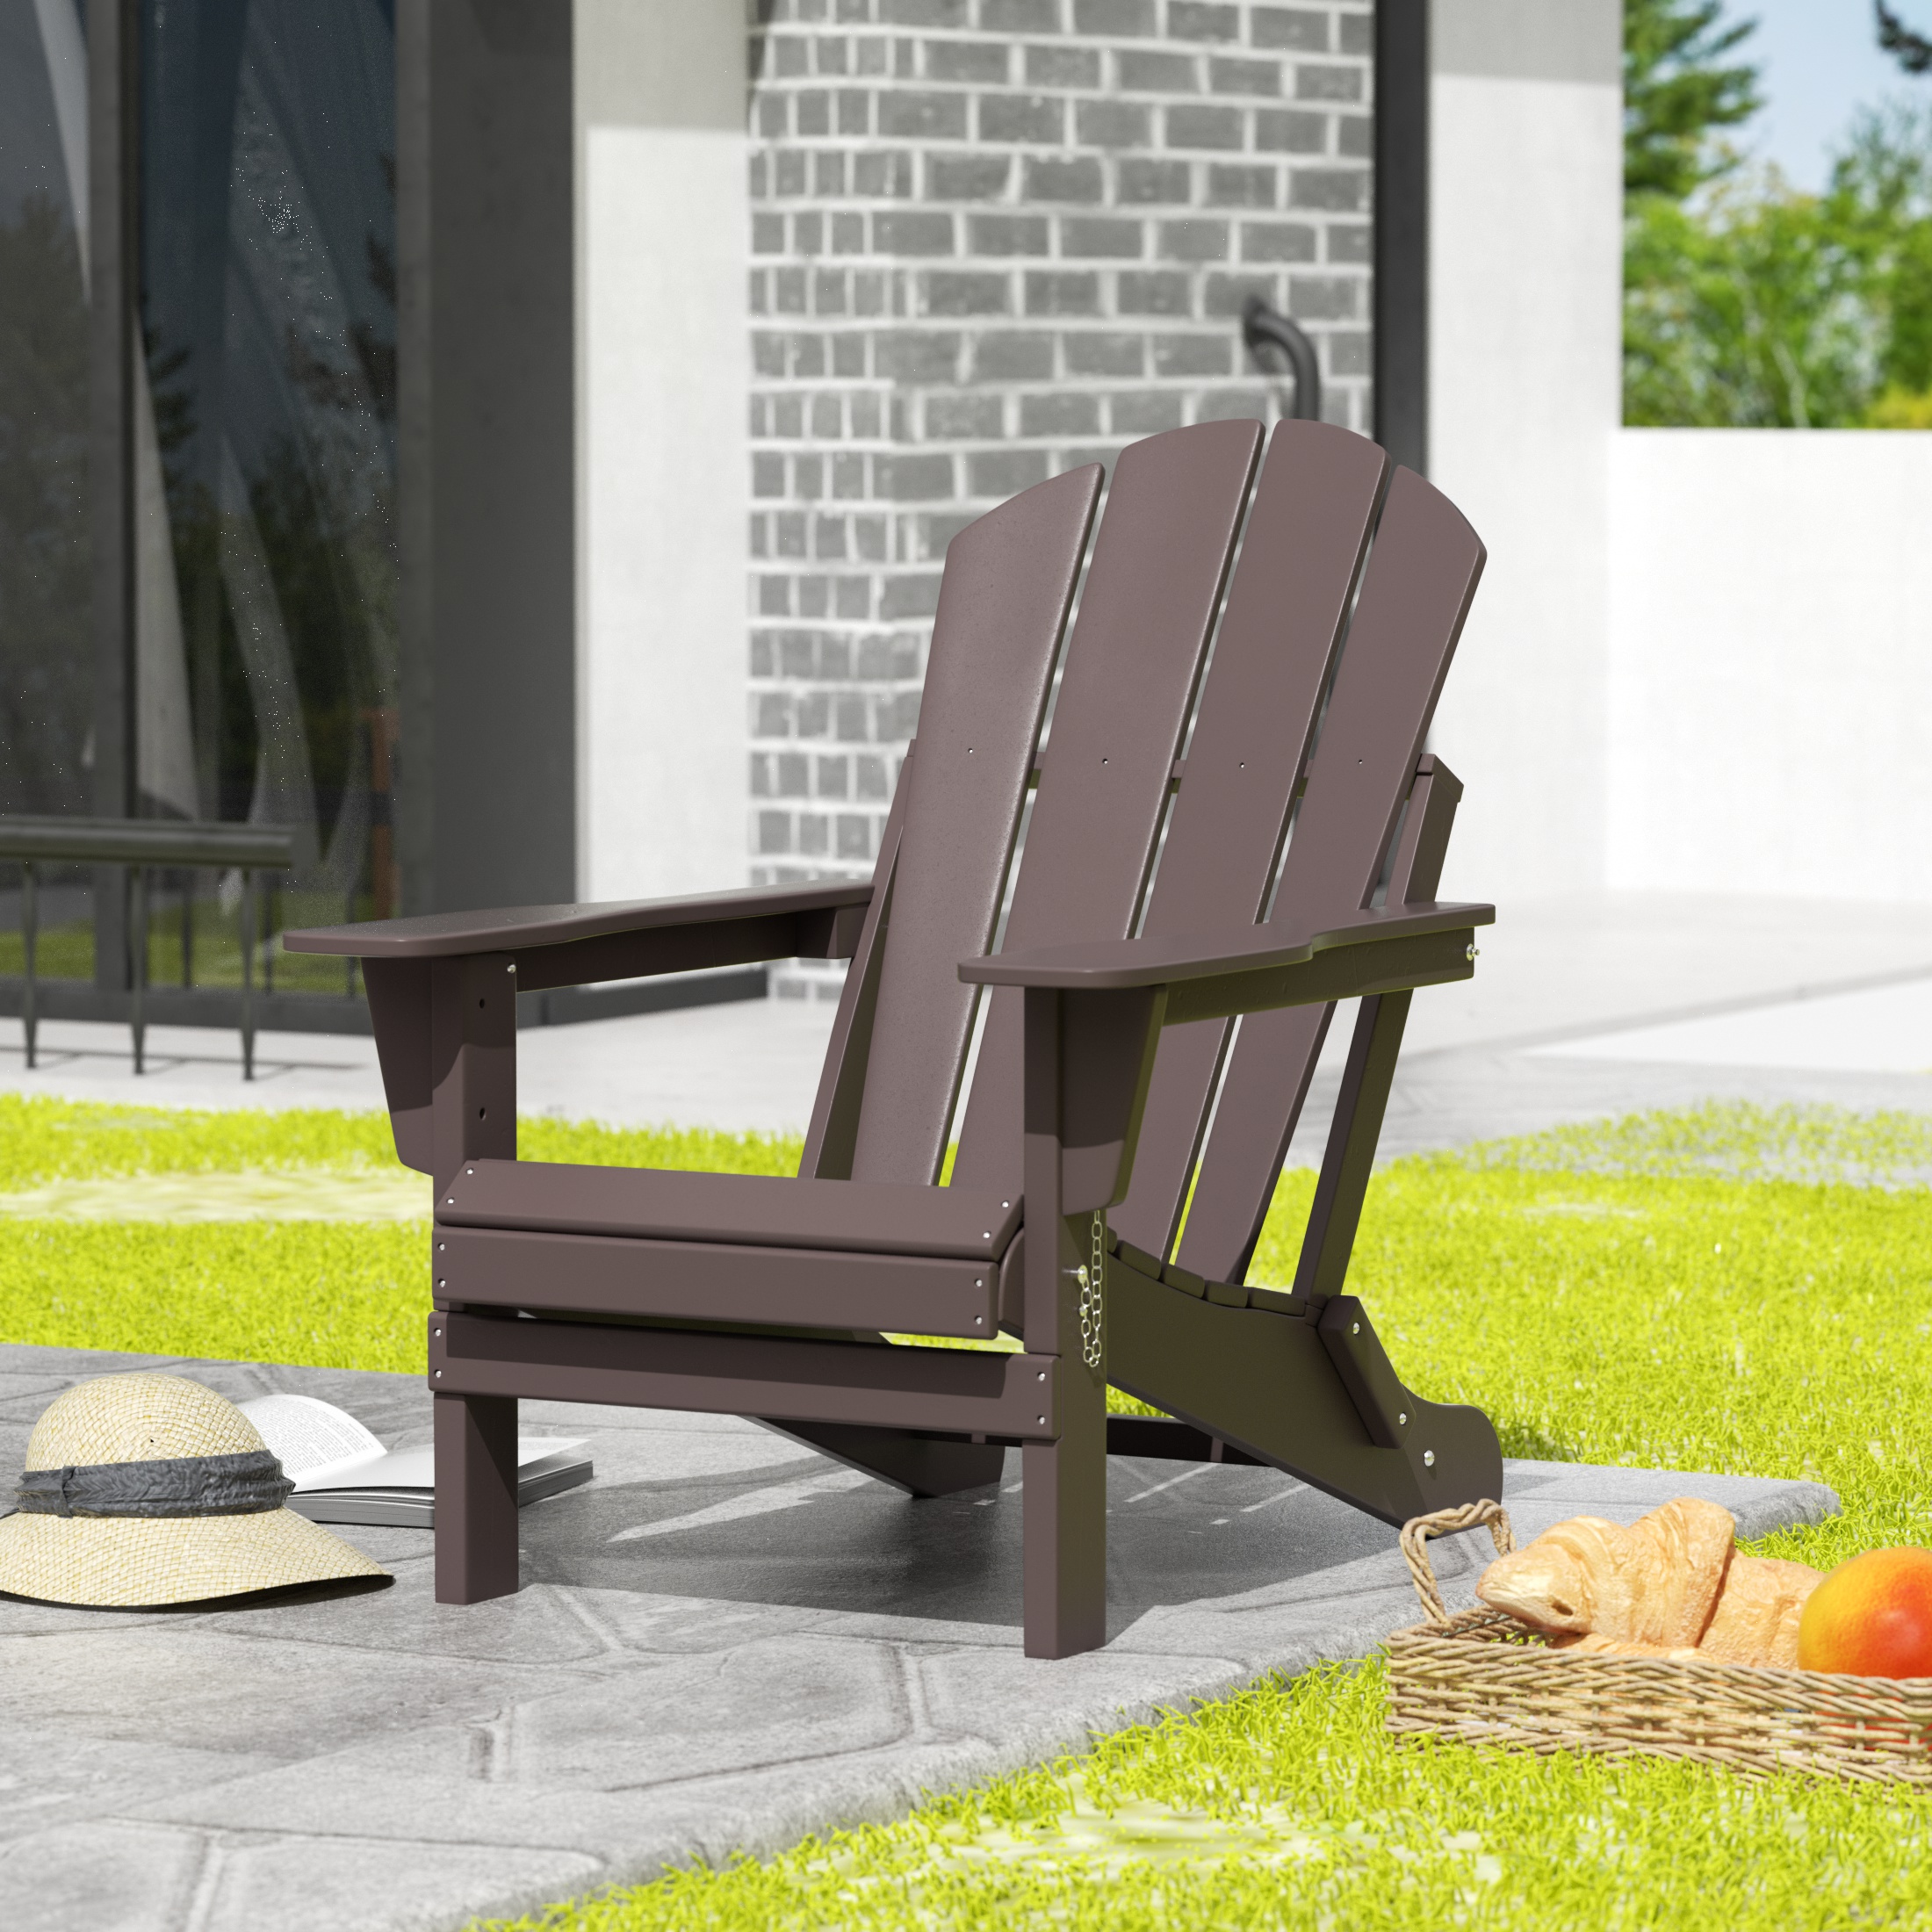 Westintrends Outdoor Folding HDPE Adirondack Chair, Patio Seat, Weather Resistant, Dark Brown - image 1 of 6